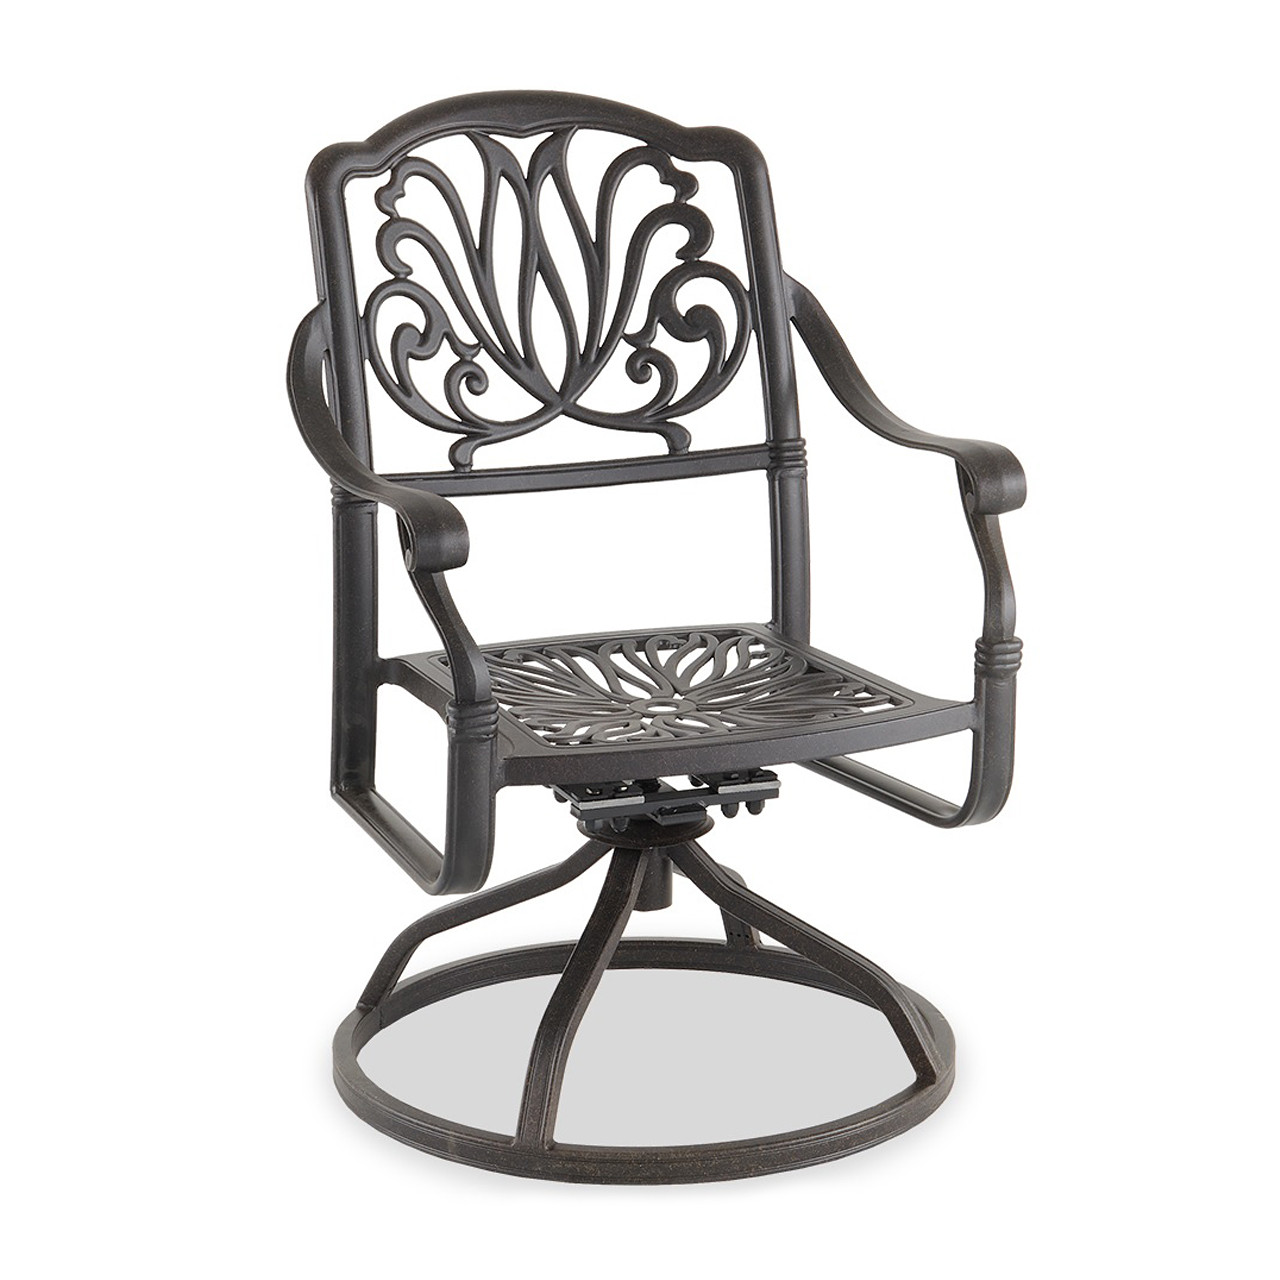 Cadiz Cast Aluminum with Cushions 7 Piece Swivel Combo Dining Set + 72 x 42 in. Table -